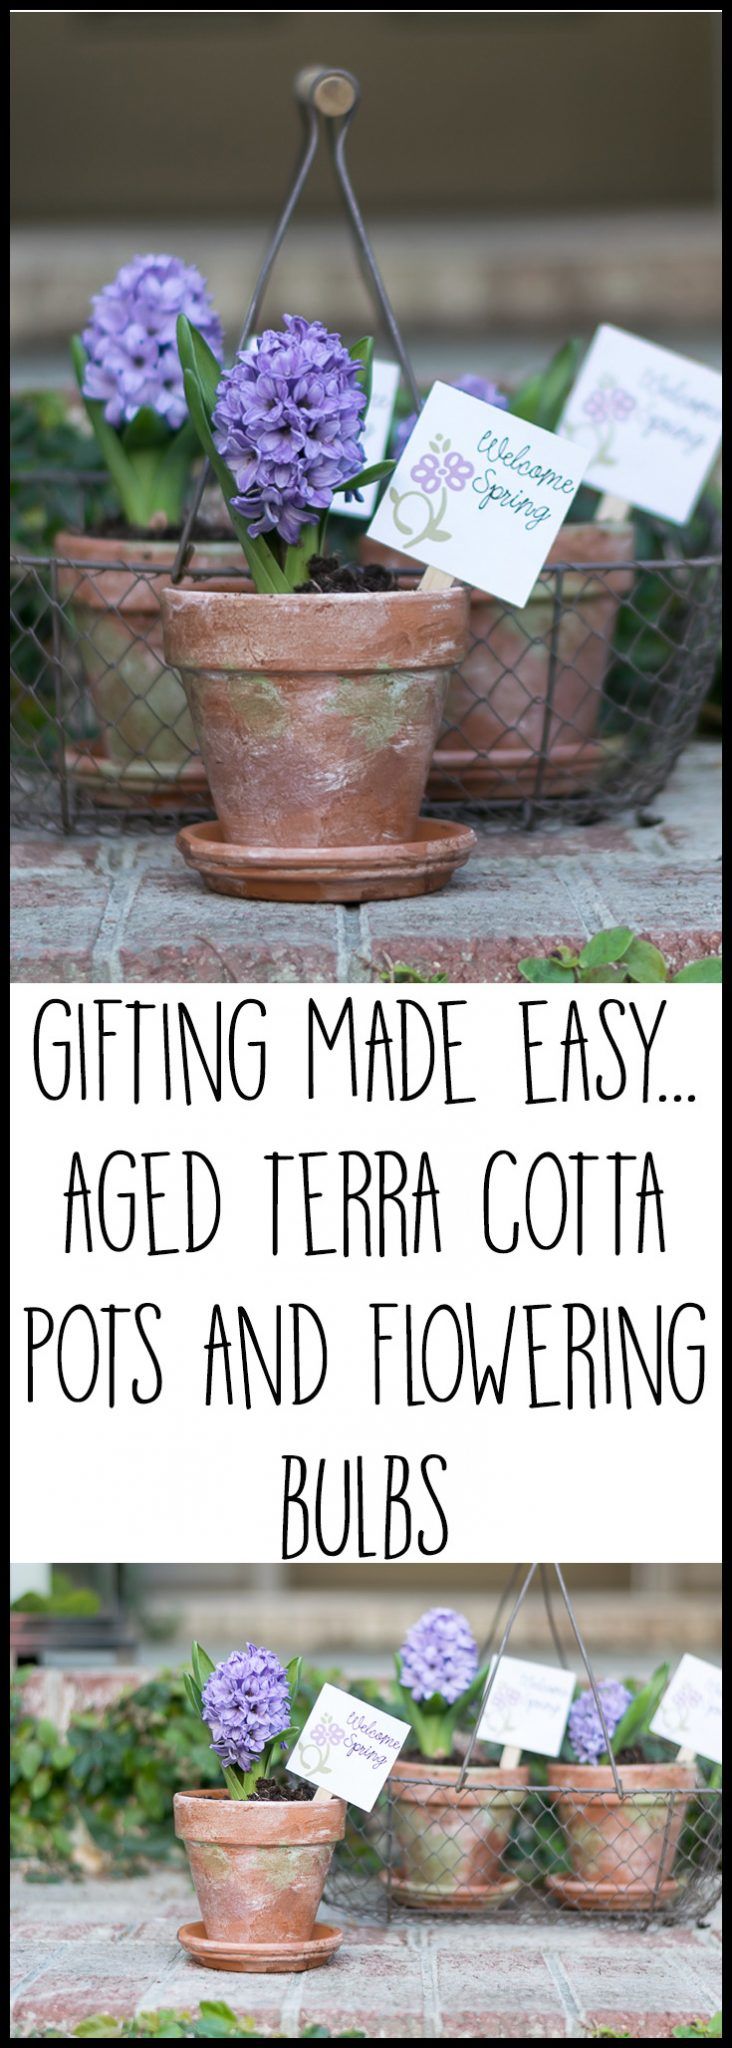 I love the aged and mossy feel that these aged terra cotta pots have. Such an easy project, with detailed instructions, materials list and a video. And these pots, with a little plant tucked in, make such perfect gifts. The tags made with the help of Cricut Explore Air, add the final touch